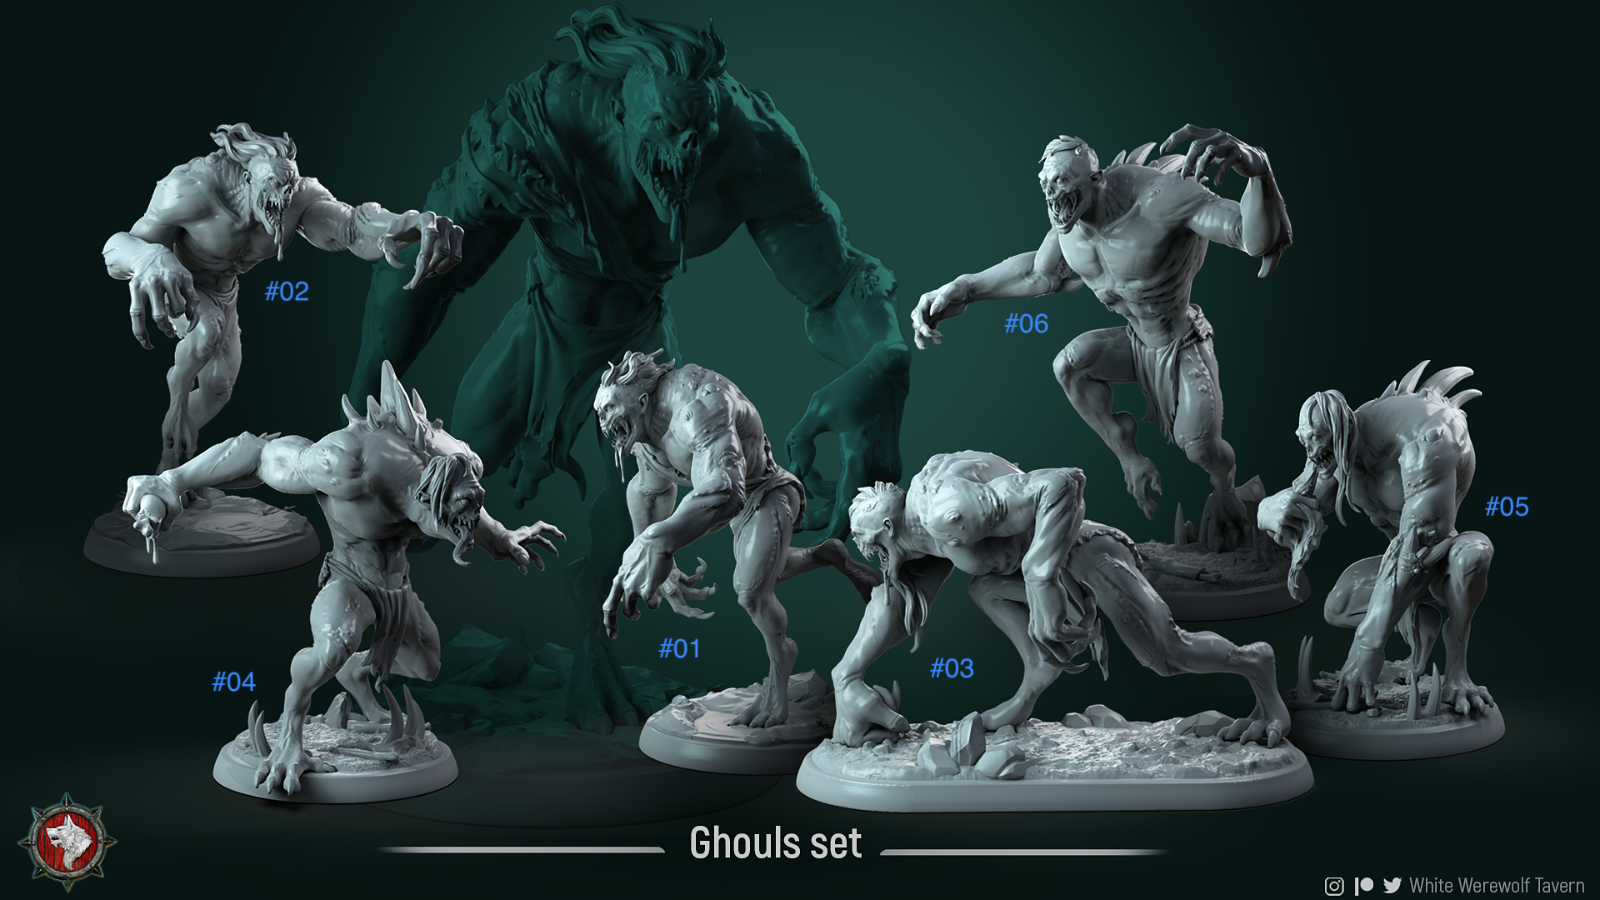 Unpainted Resin 3D Printed Miniature Ghouls by White Werewolf Tavern